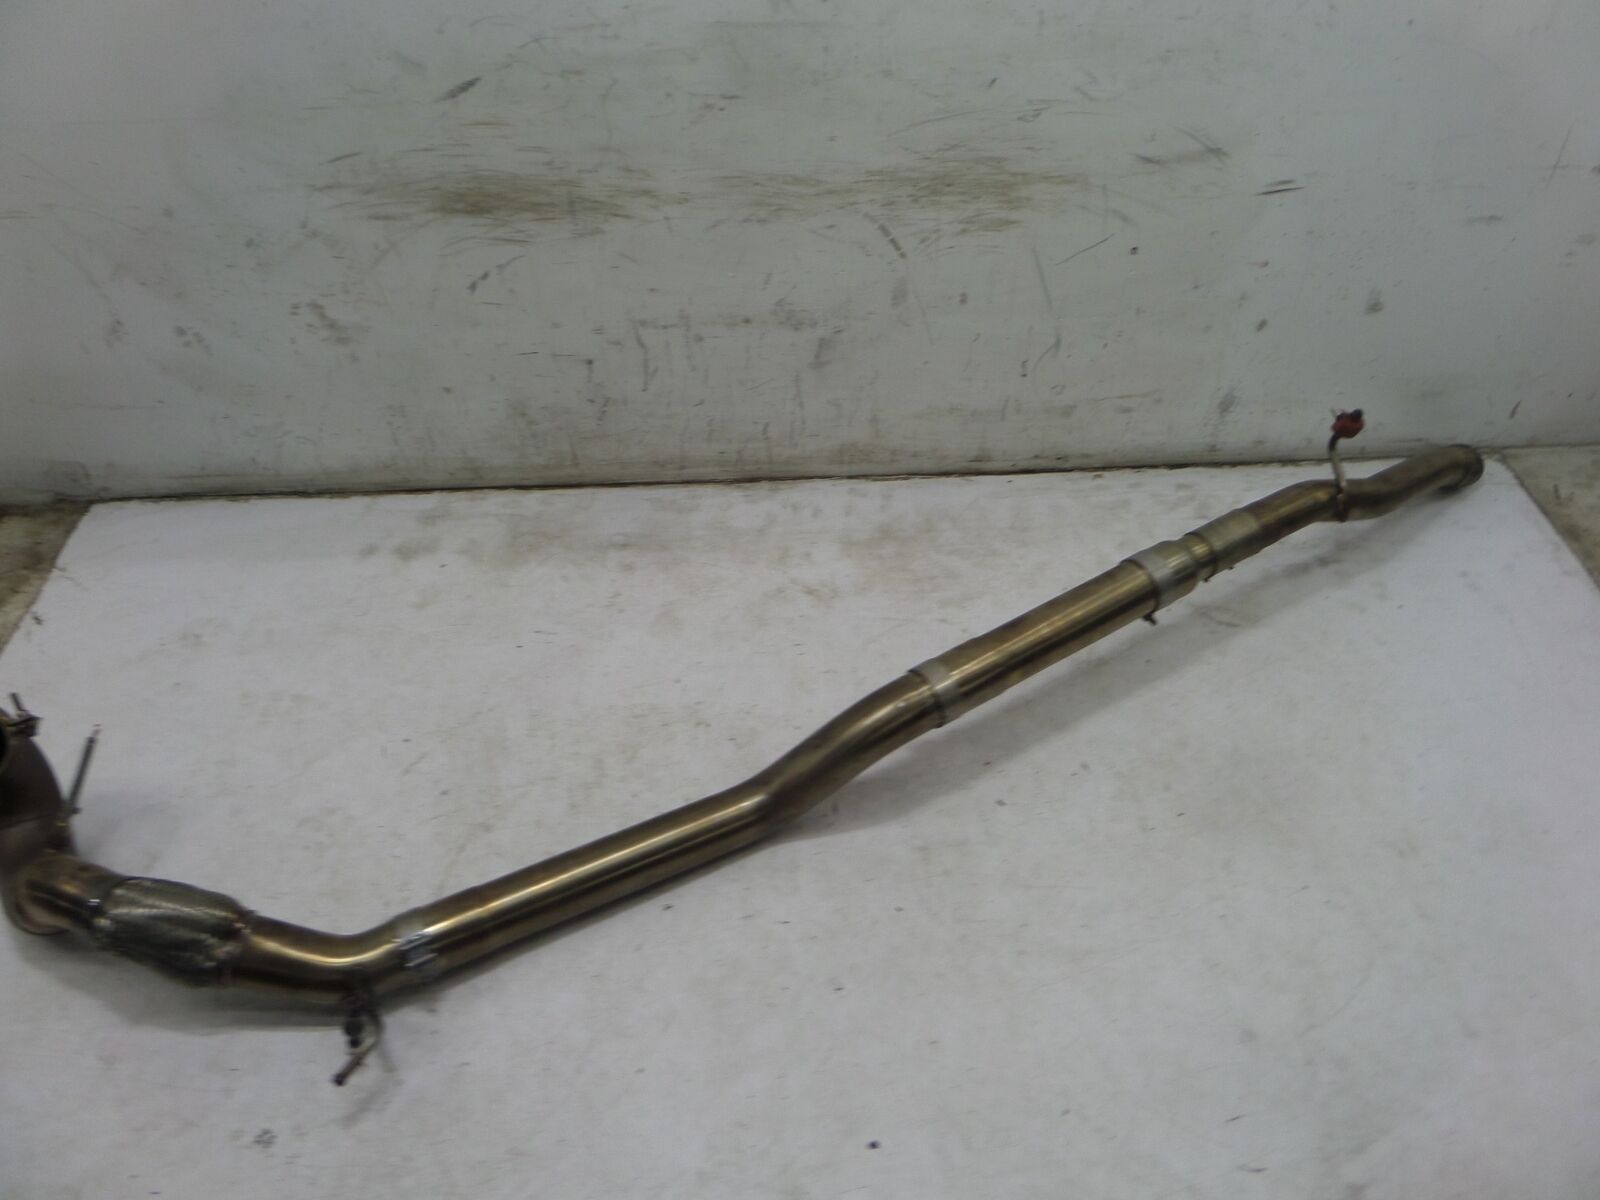 15-18 Audi S3 8V CTS Turbo Exhaust Down Pipe Mid Section Some Damage to Flexpipe